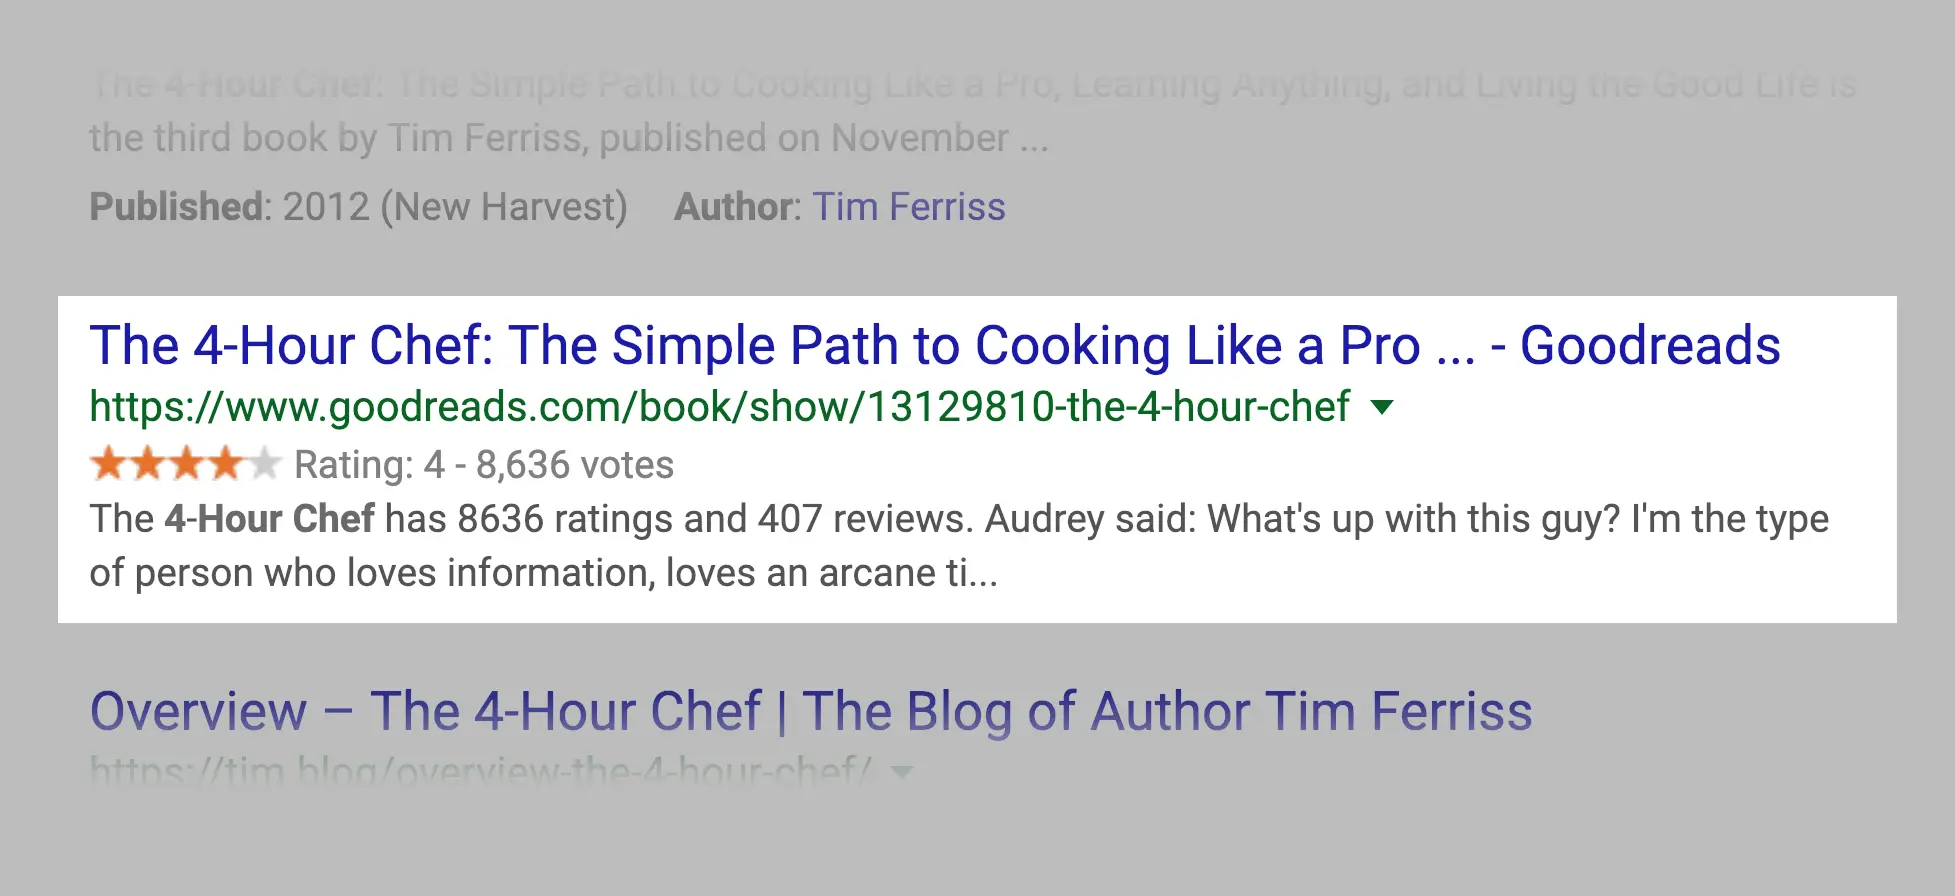 featured-snippet-sample